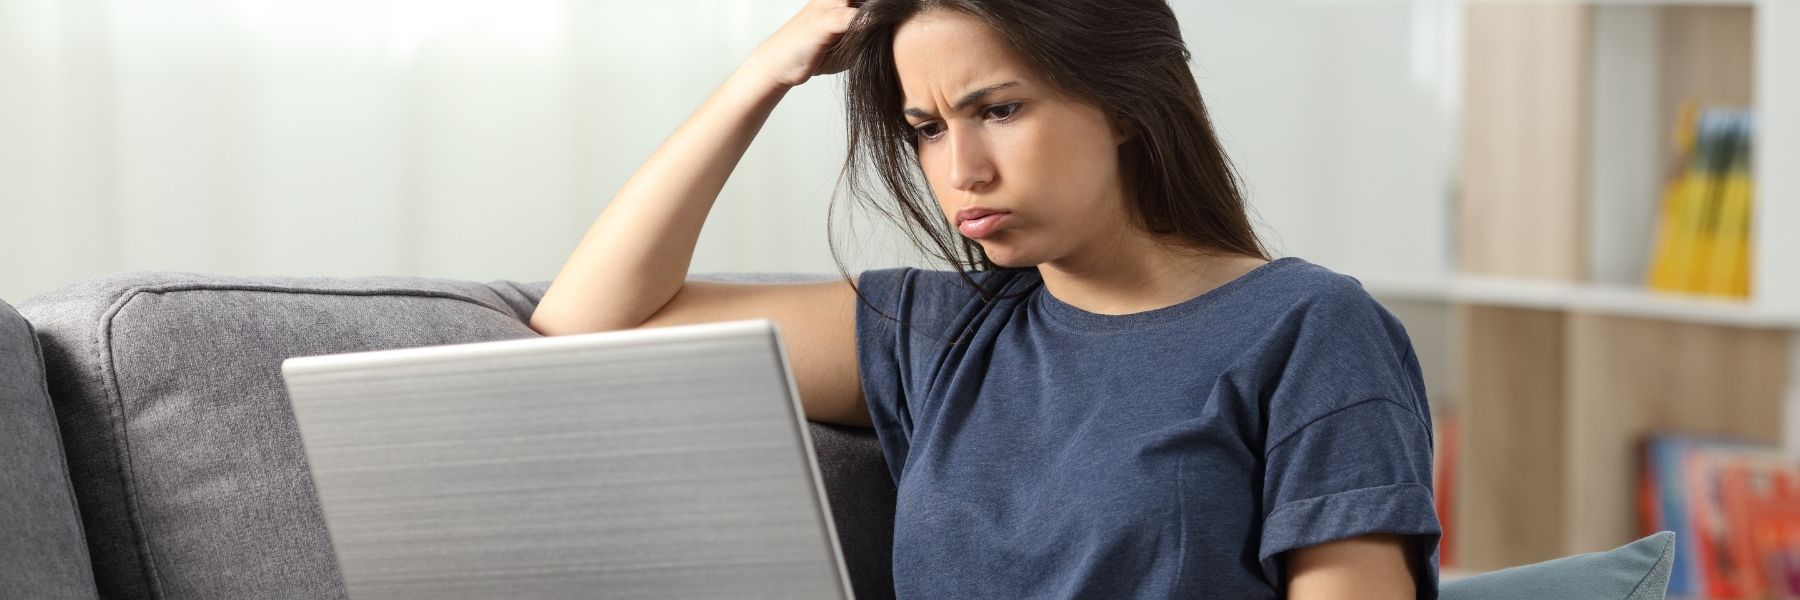 Young woman looking frustrated and working on laptop